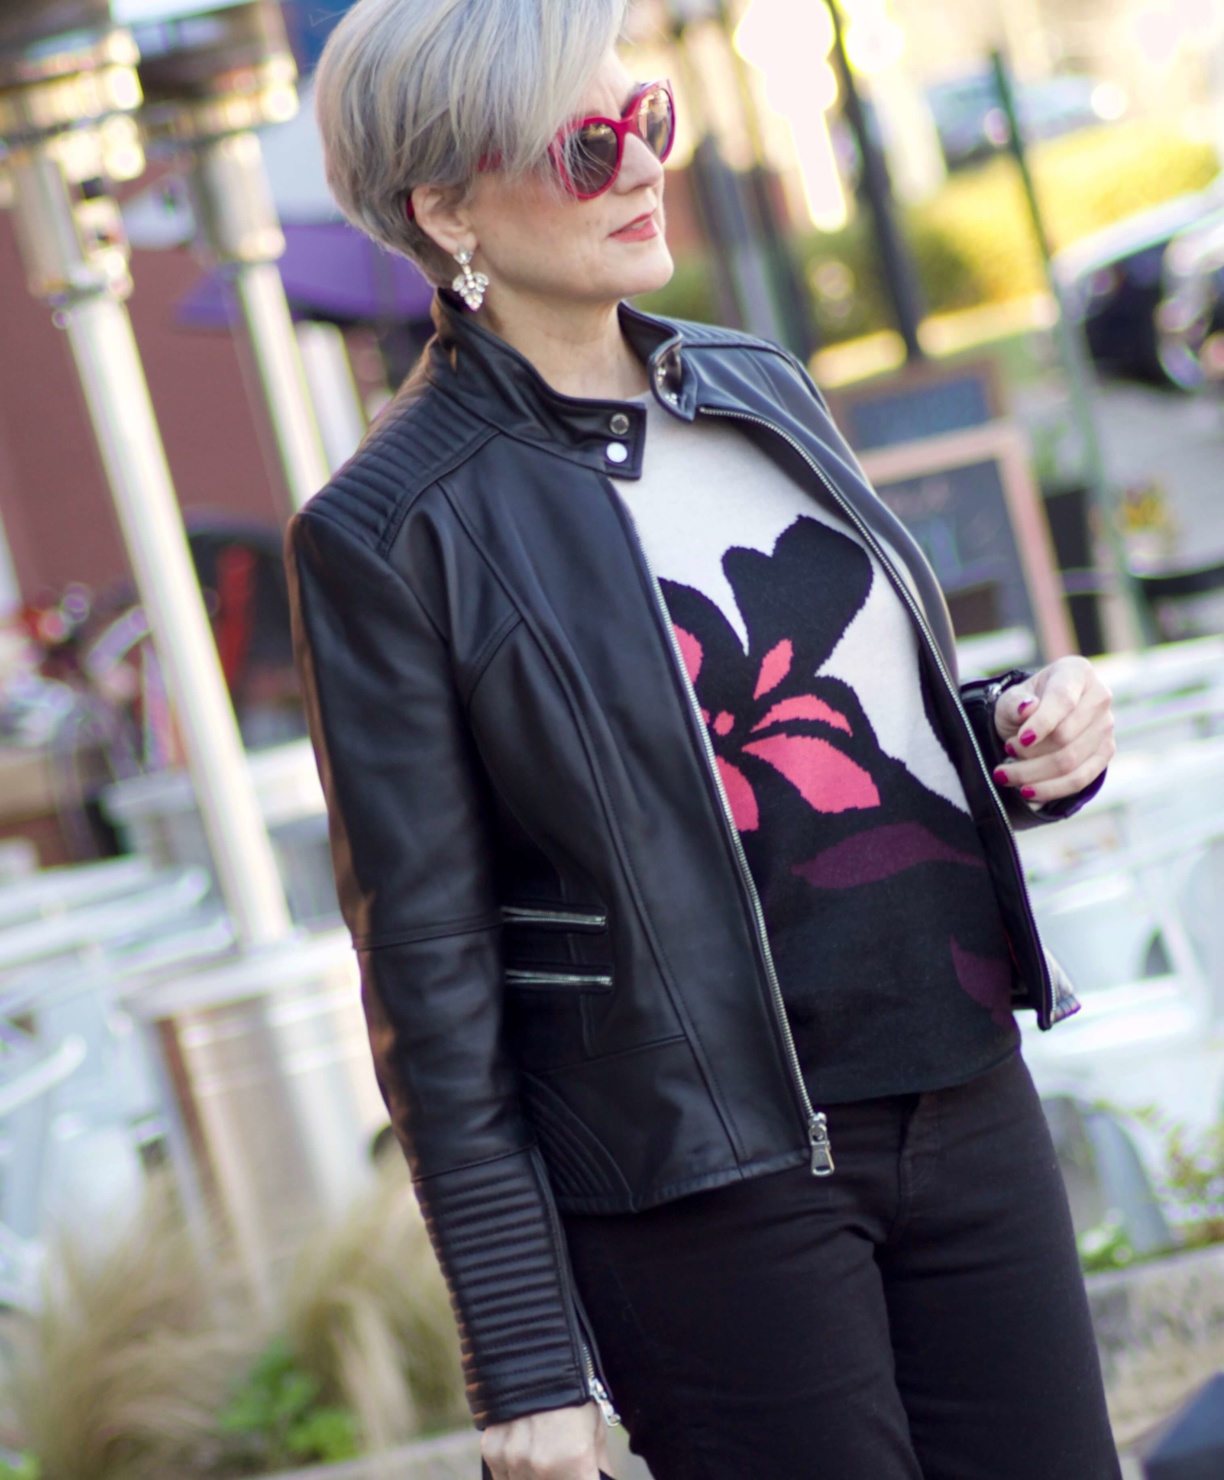 beth from Style at a Certain Age wears a floral jacquard sweater, black skinny jeans, black leather moto jacket and pink suede pumps for date night